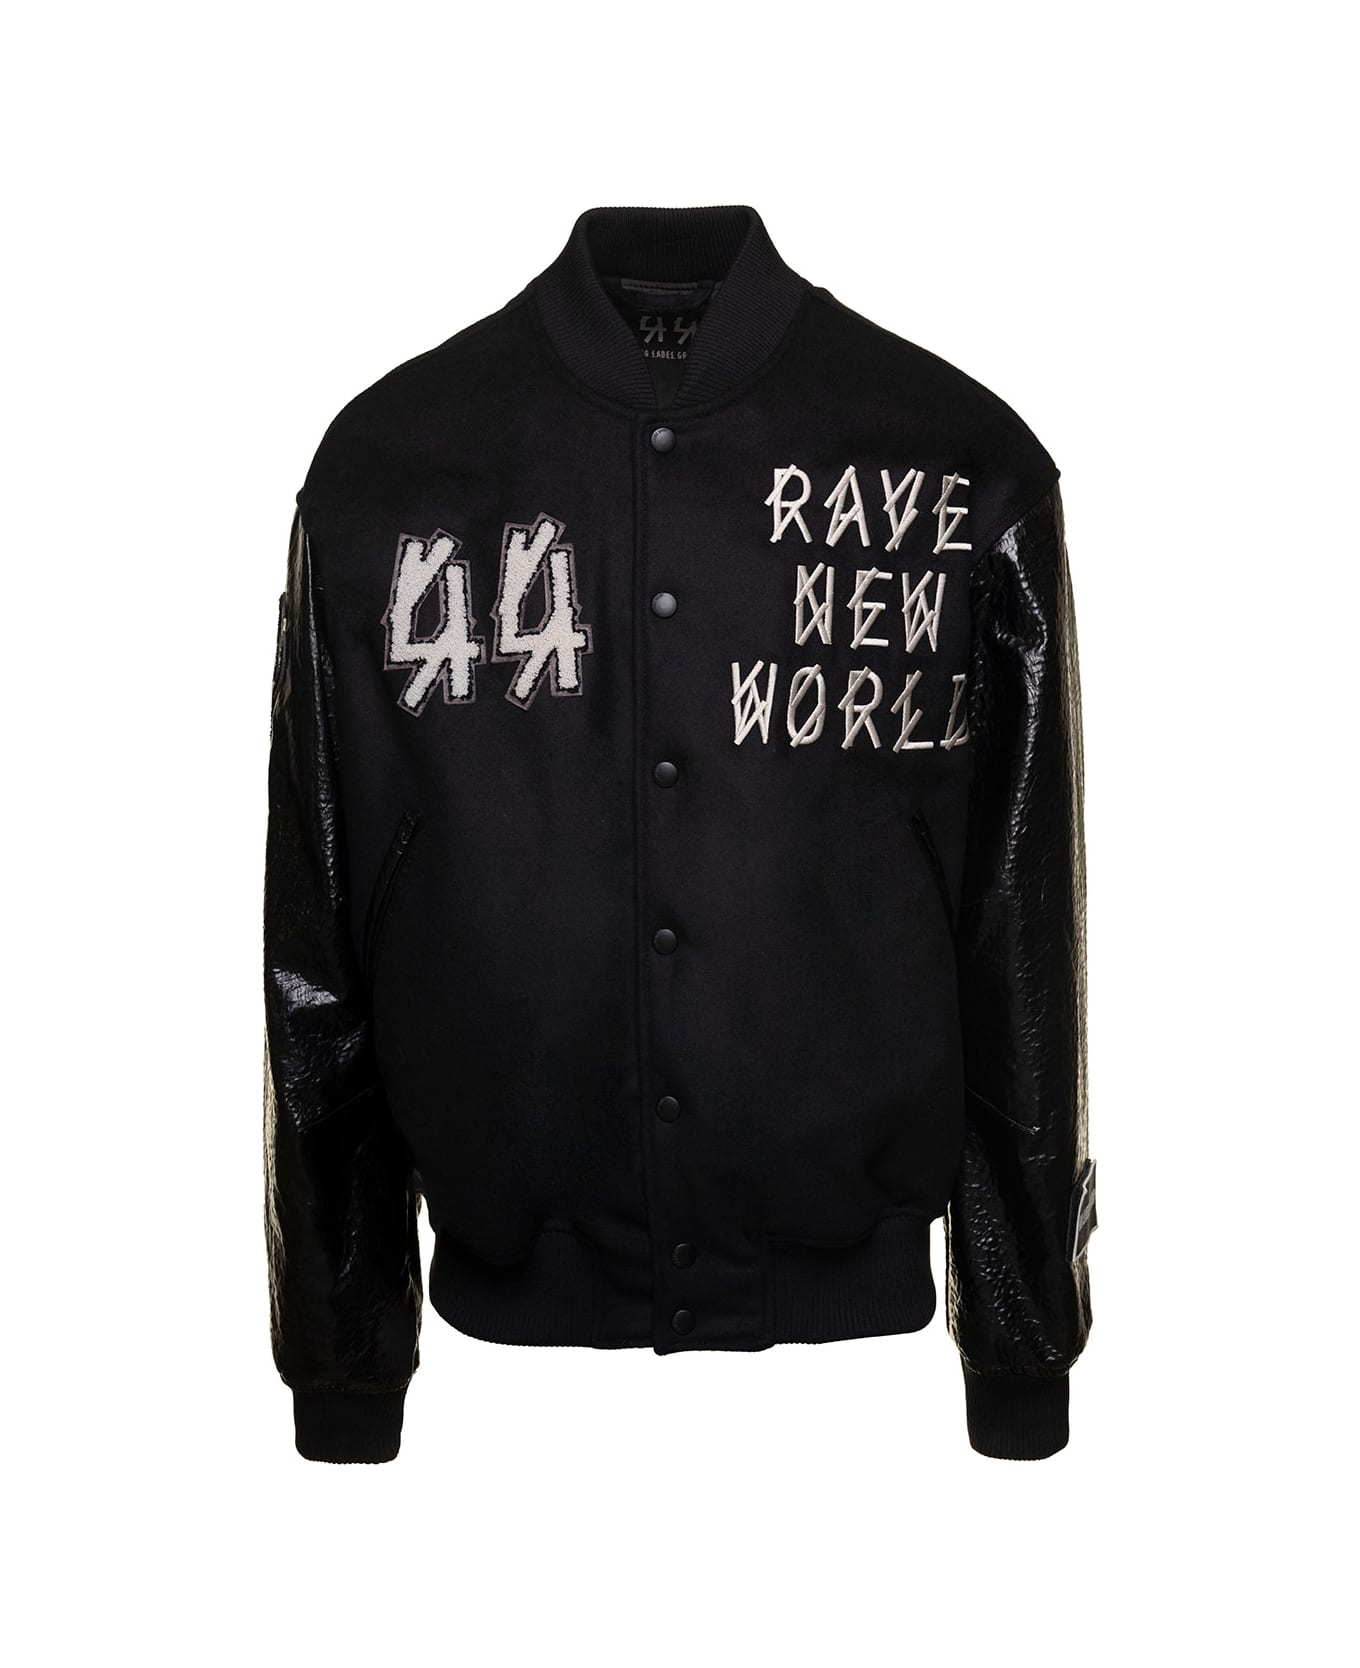 44 Label Group Black Varsity Jacket With Faux Leather Sleeves And Logo Patch Man - Black ジャケット